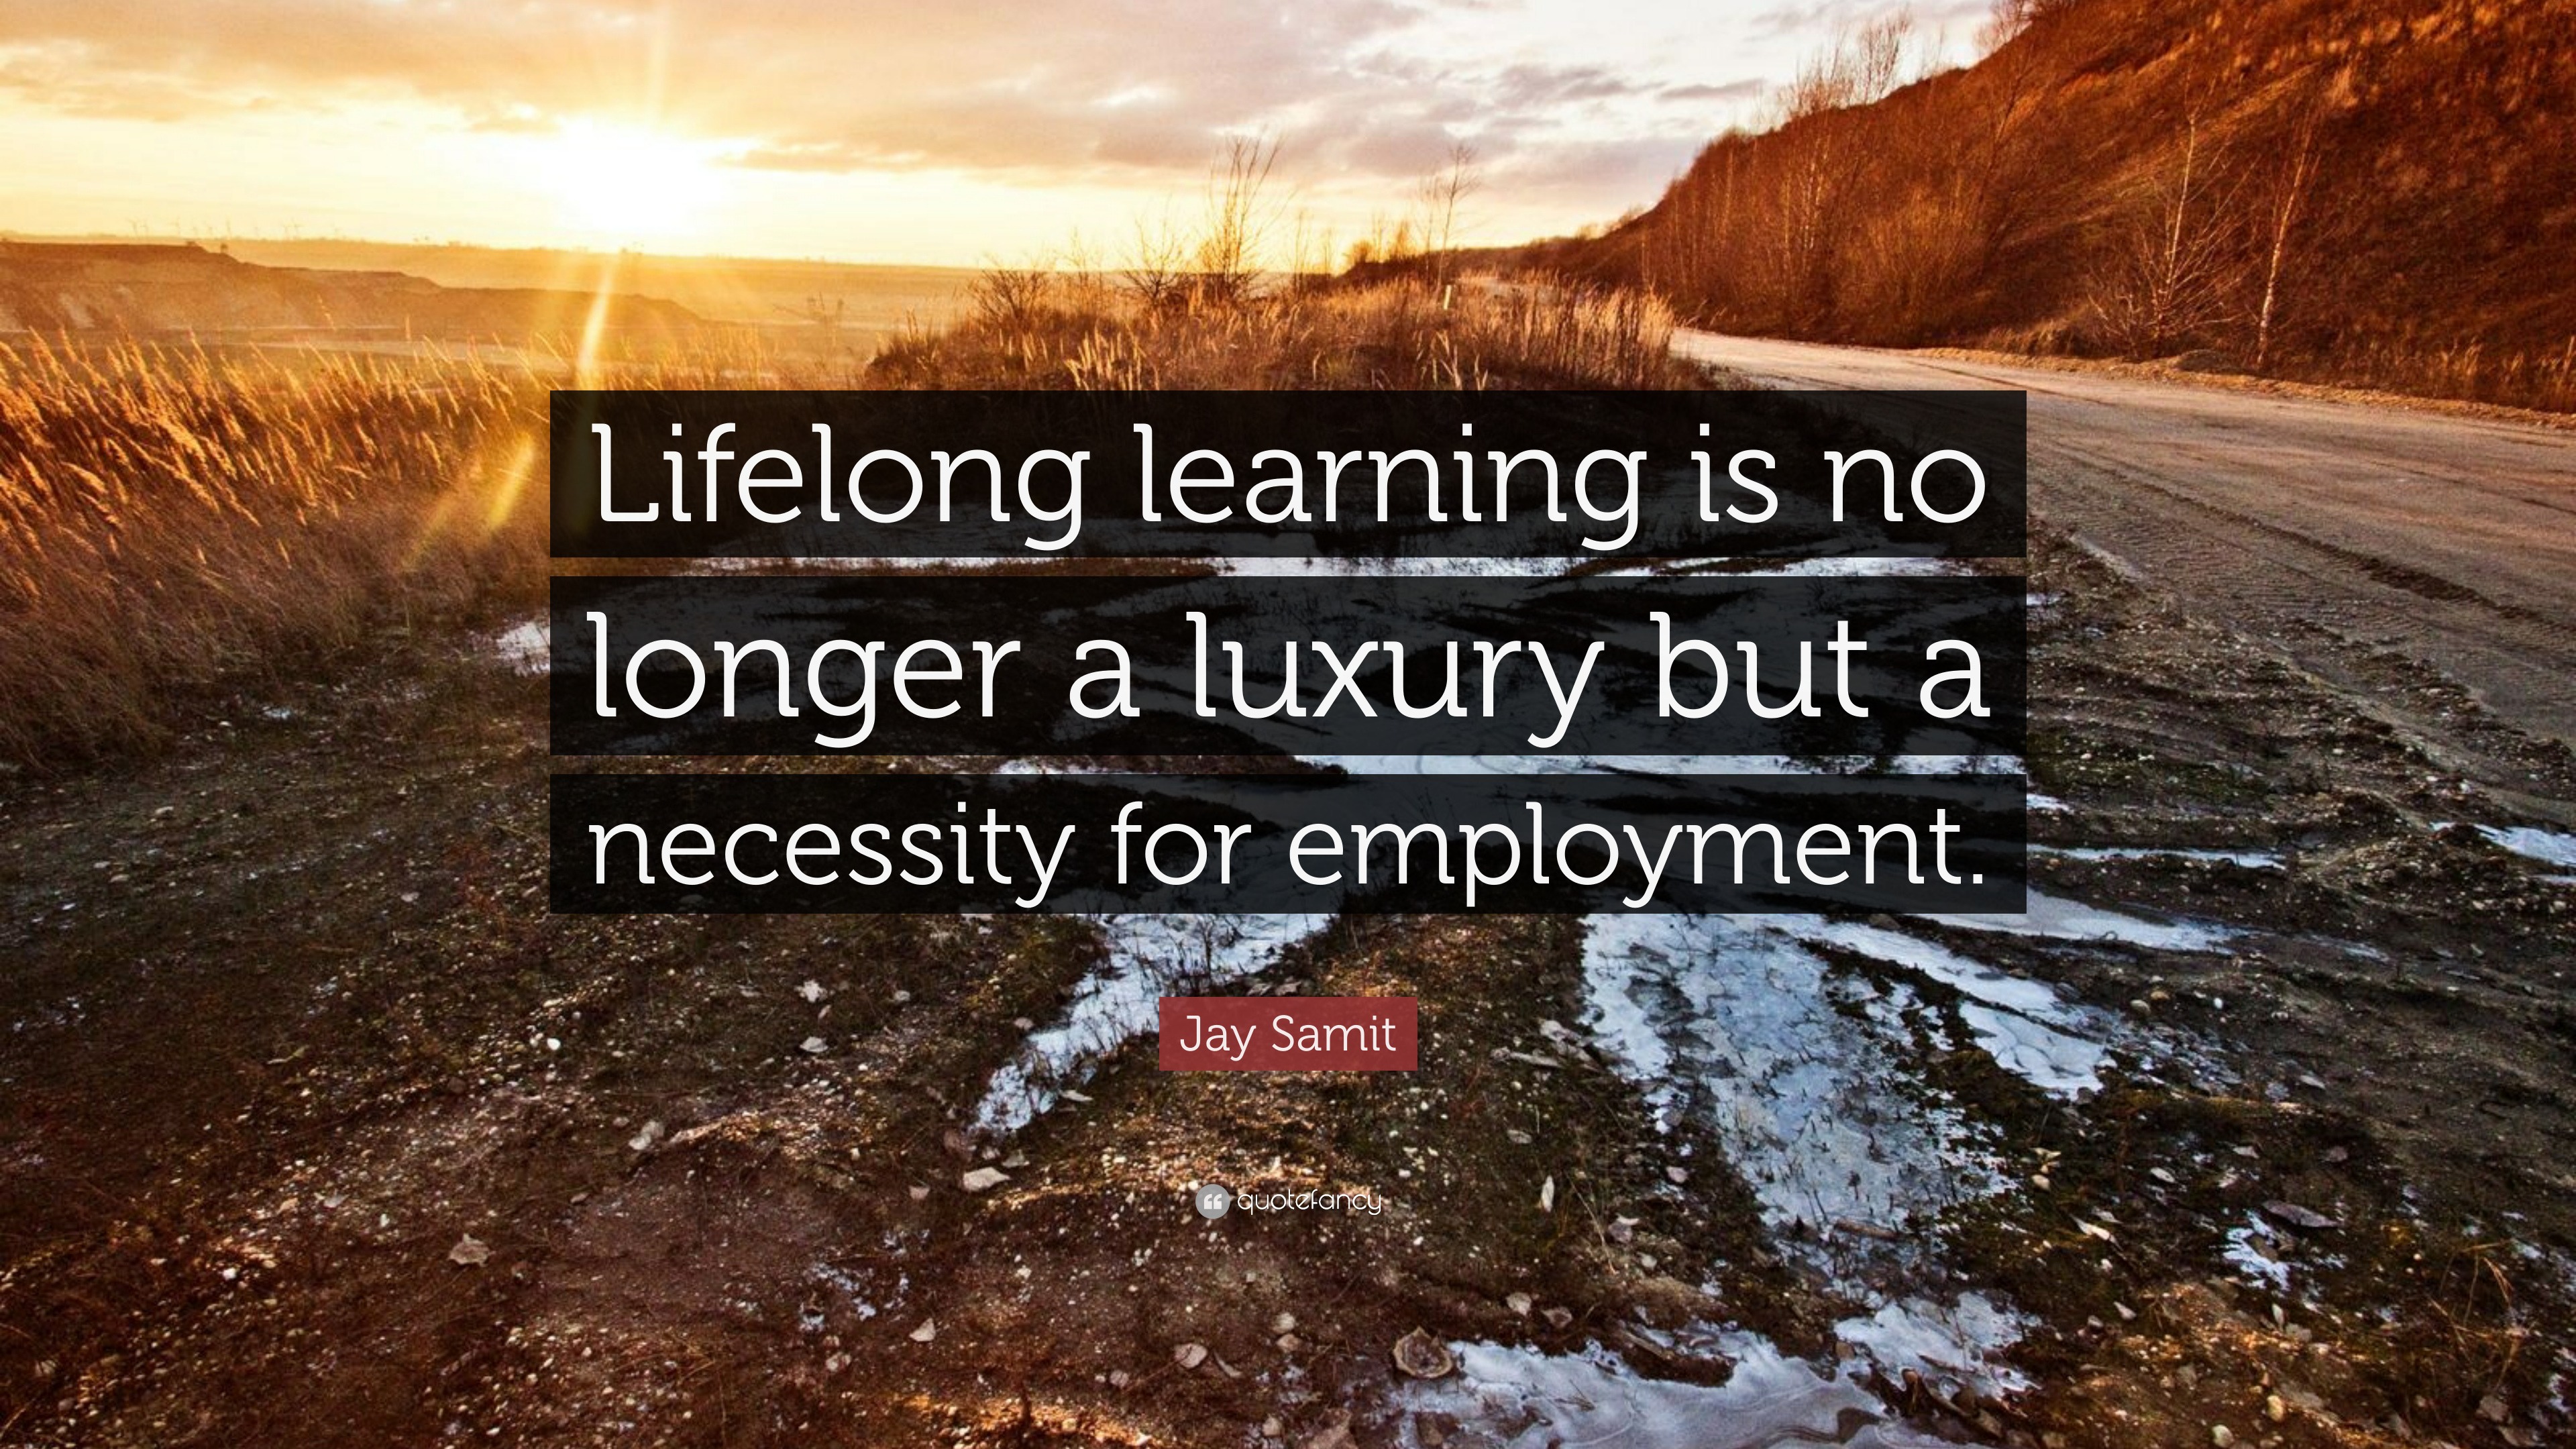 Jay Samit Quote: “Lifelong learning is no longer a luxury but a ...